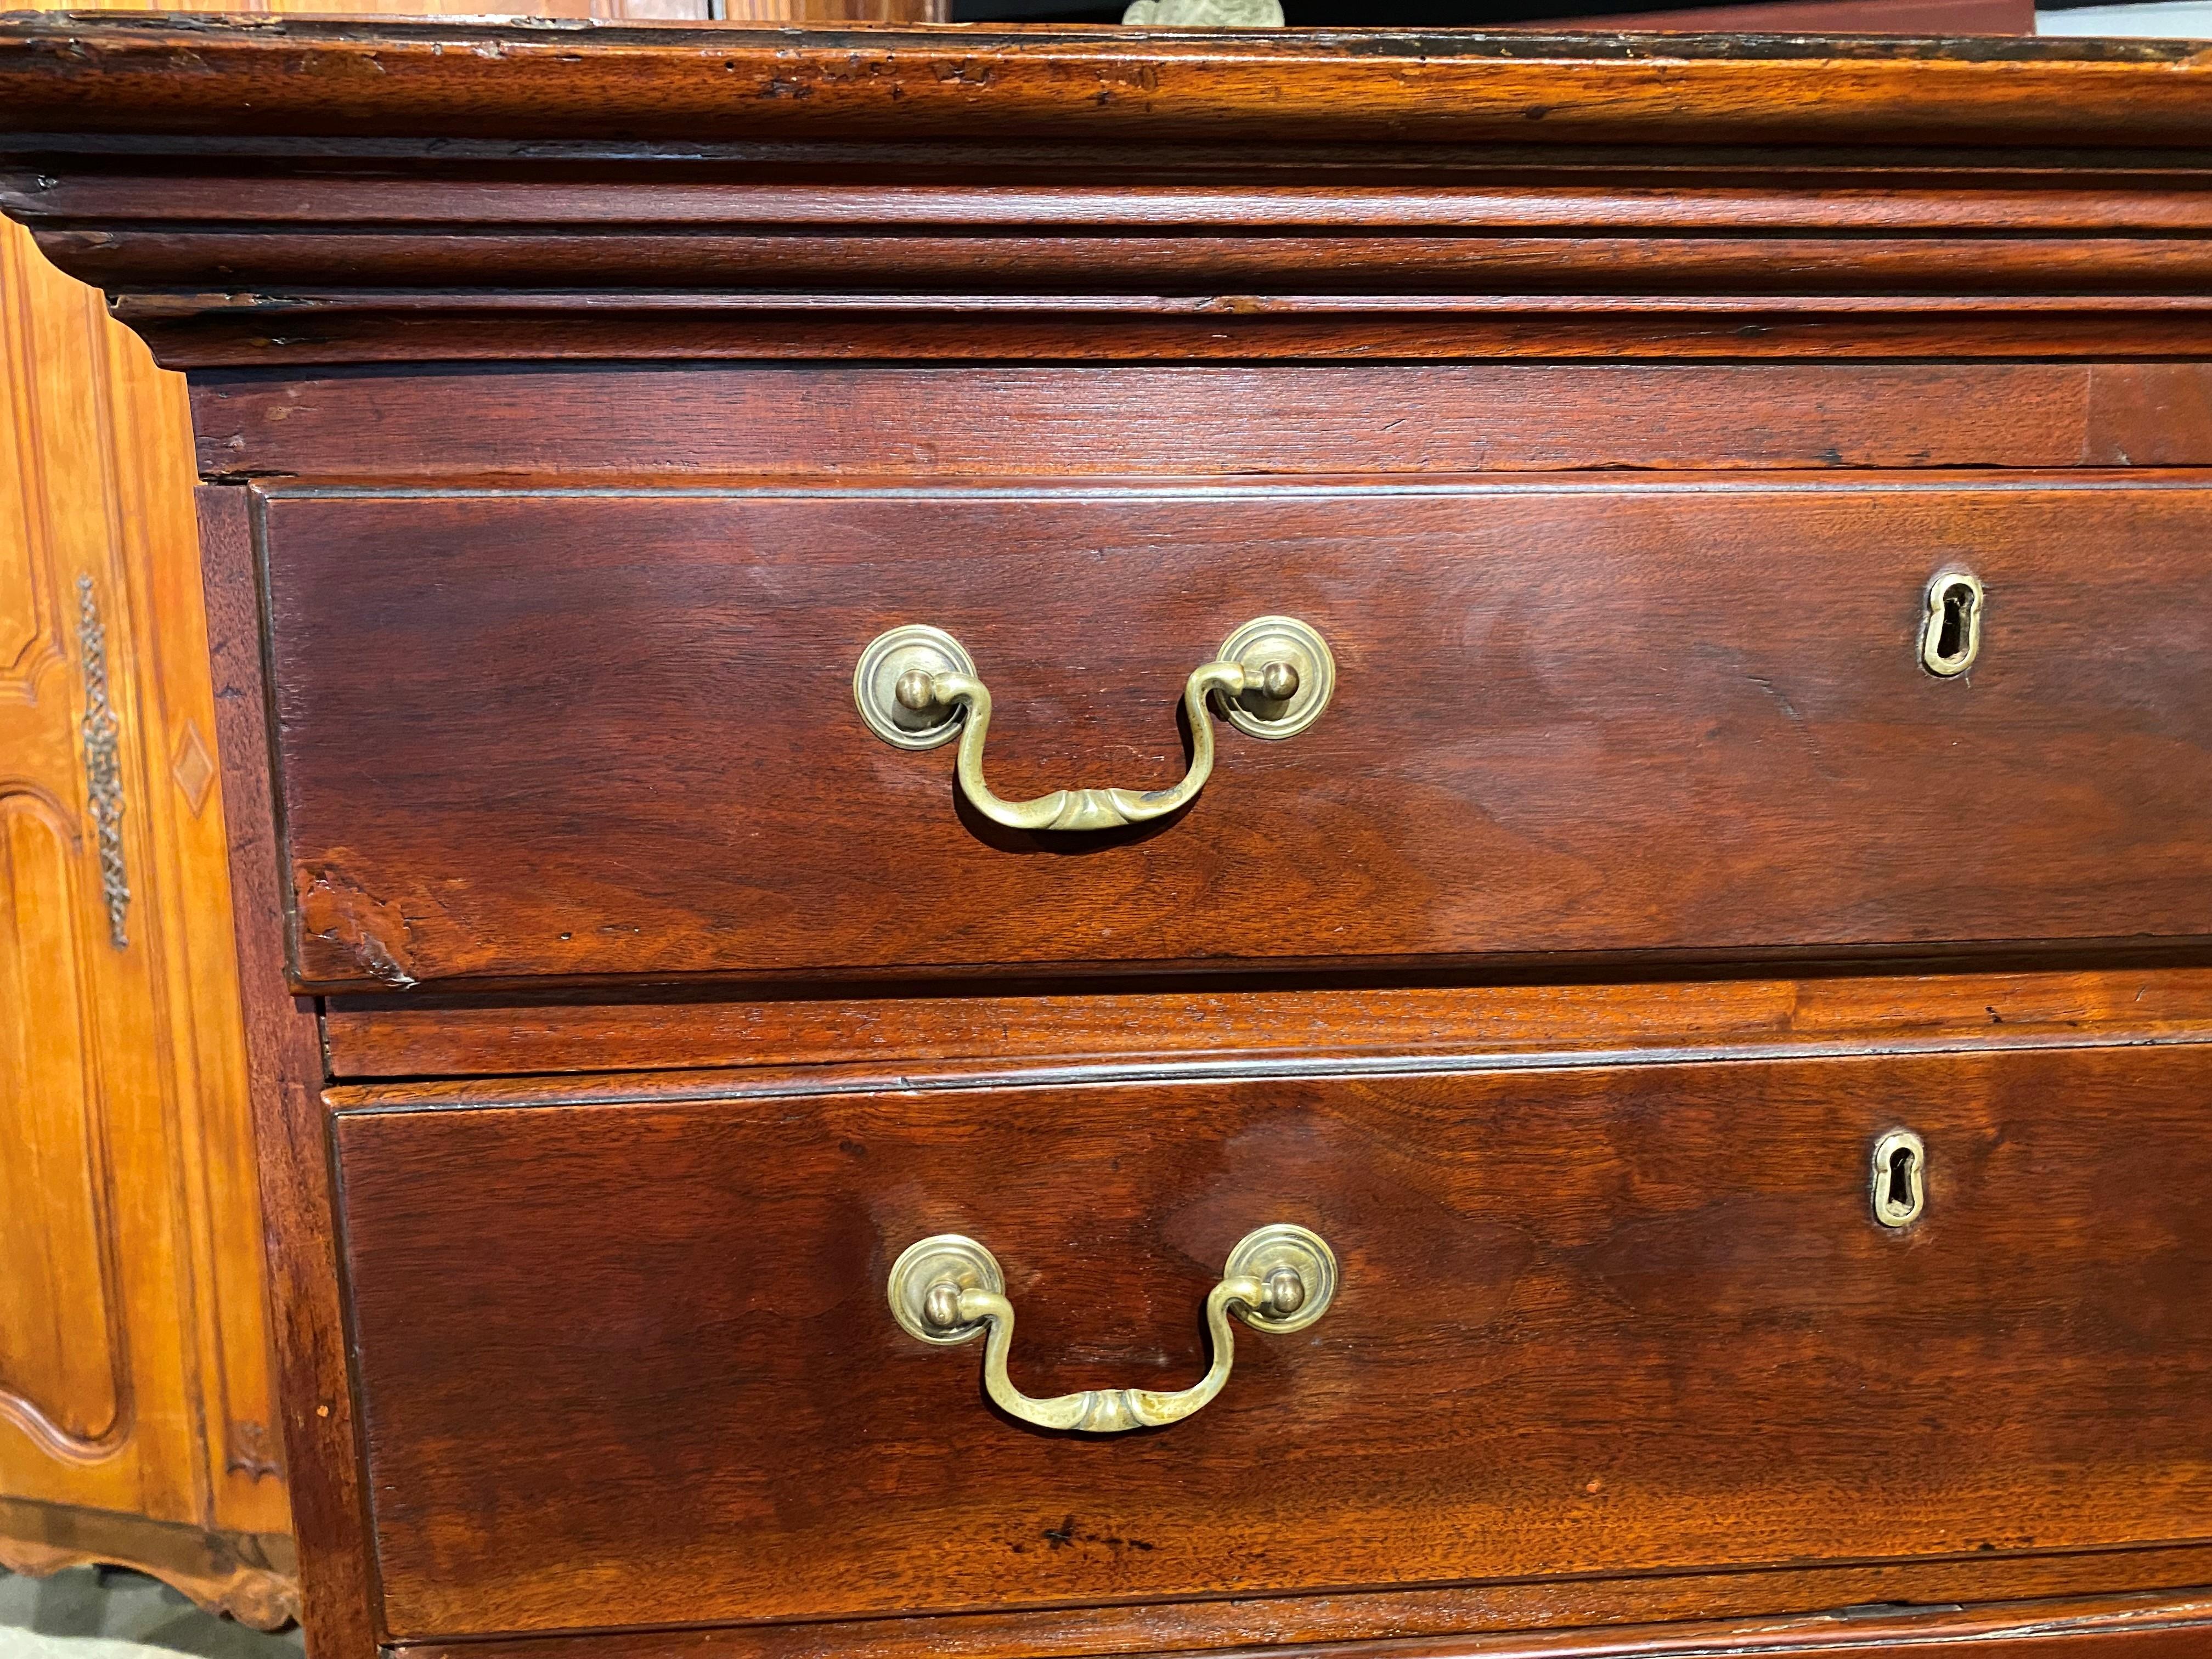 Chippendale Late 18th C Walnut Seven Drawer Tall Chest, Probably Maryland or Pennsylvania